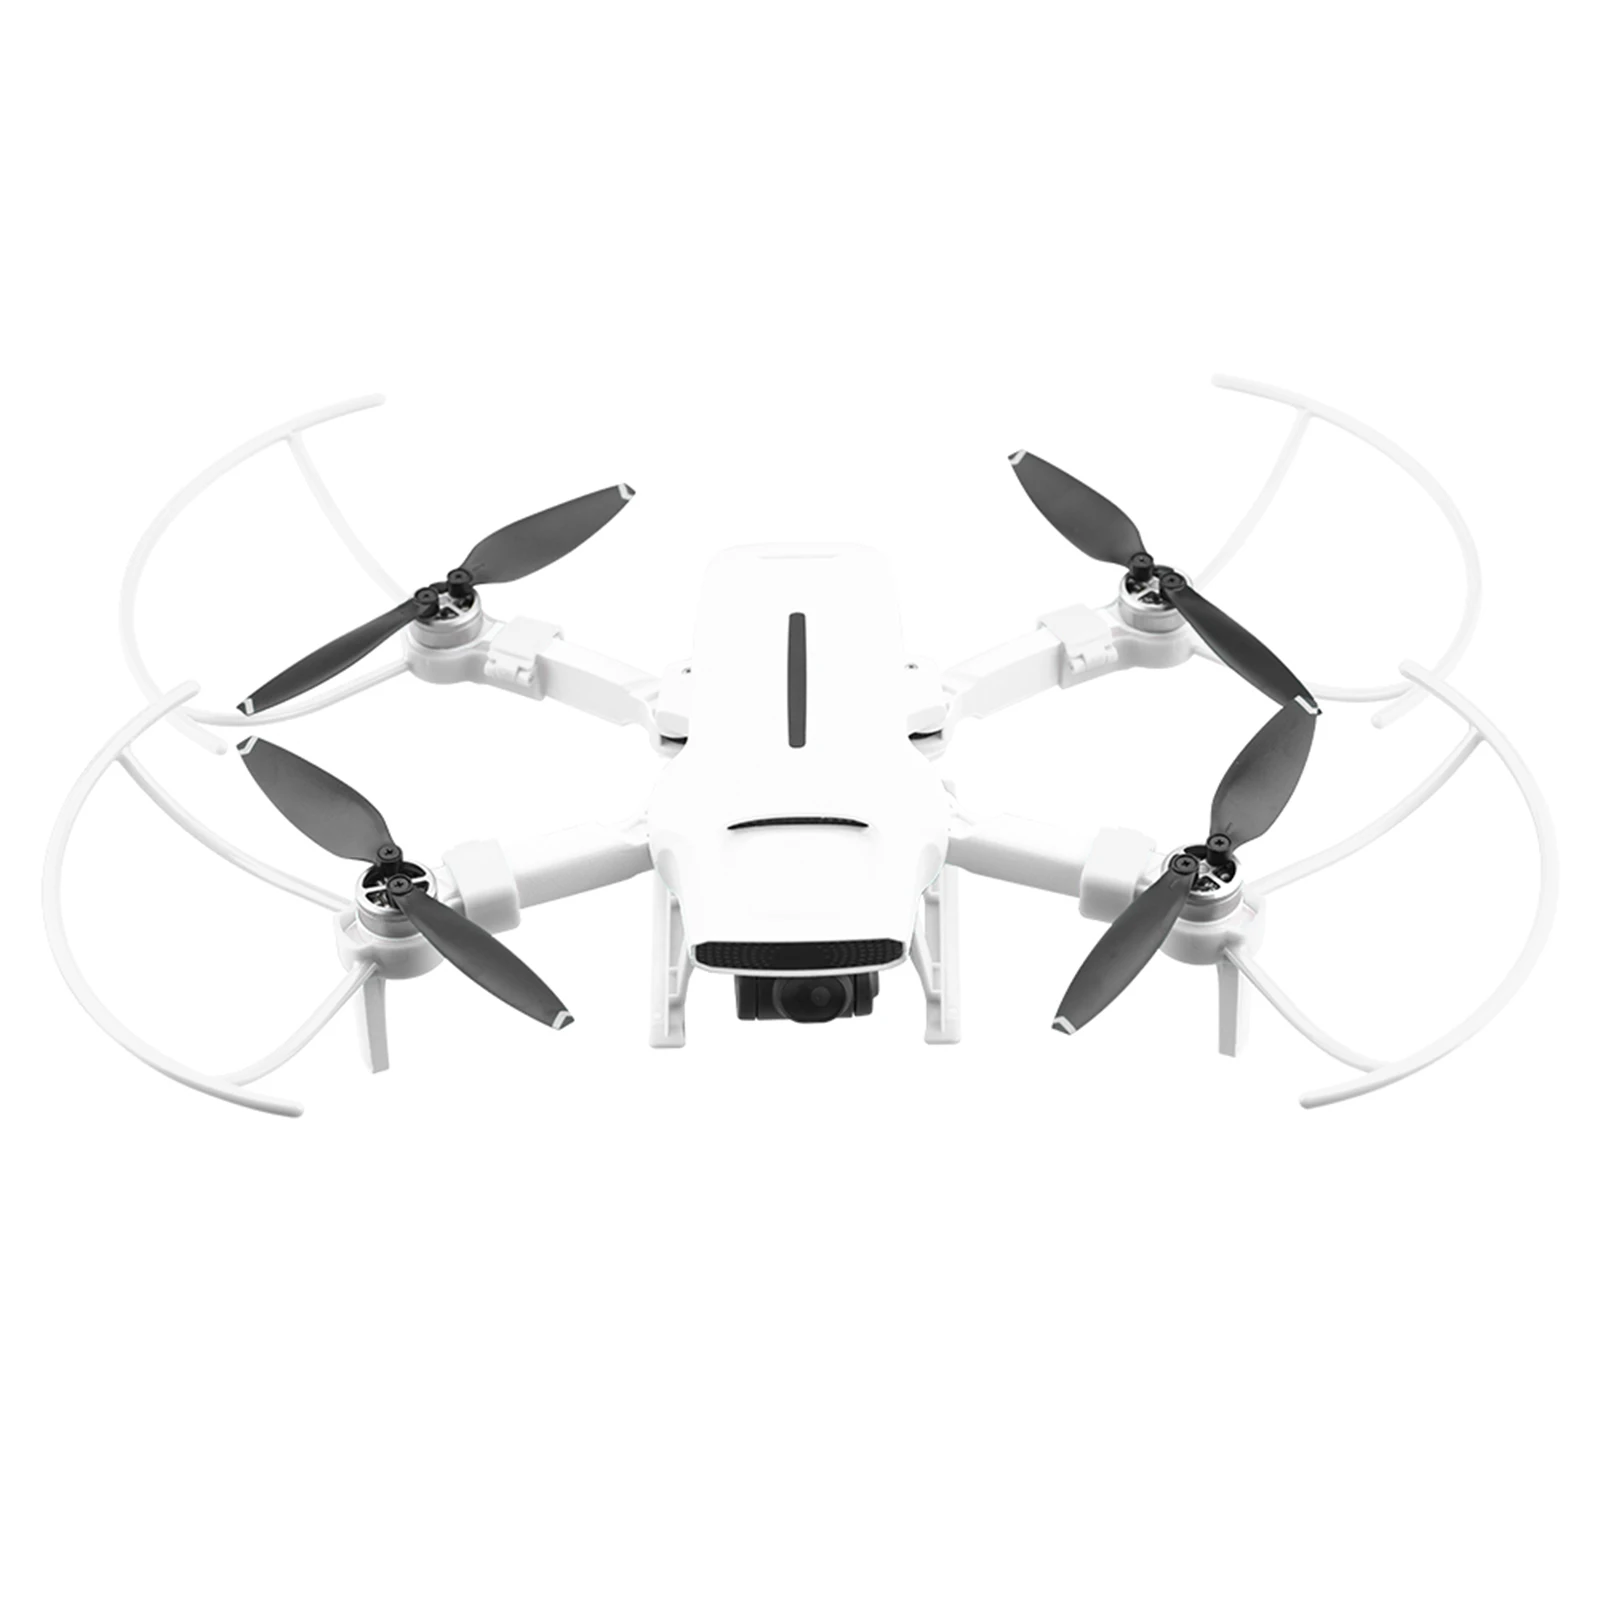 Landing Gear Kit For xiaomi FIMI X8 MINI Drone Height Extender Skid Support Accessories Shock Absorption Protector Guard Stand 